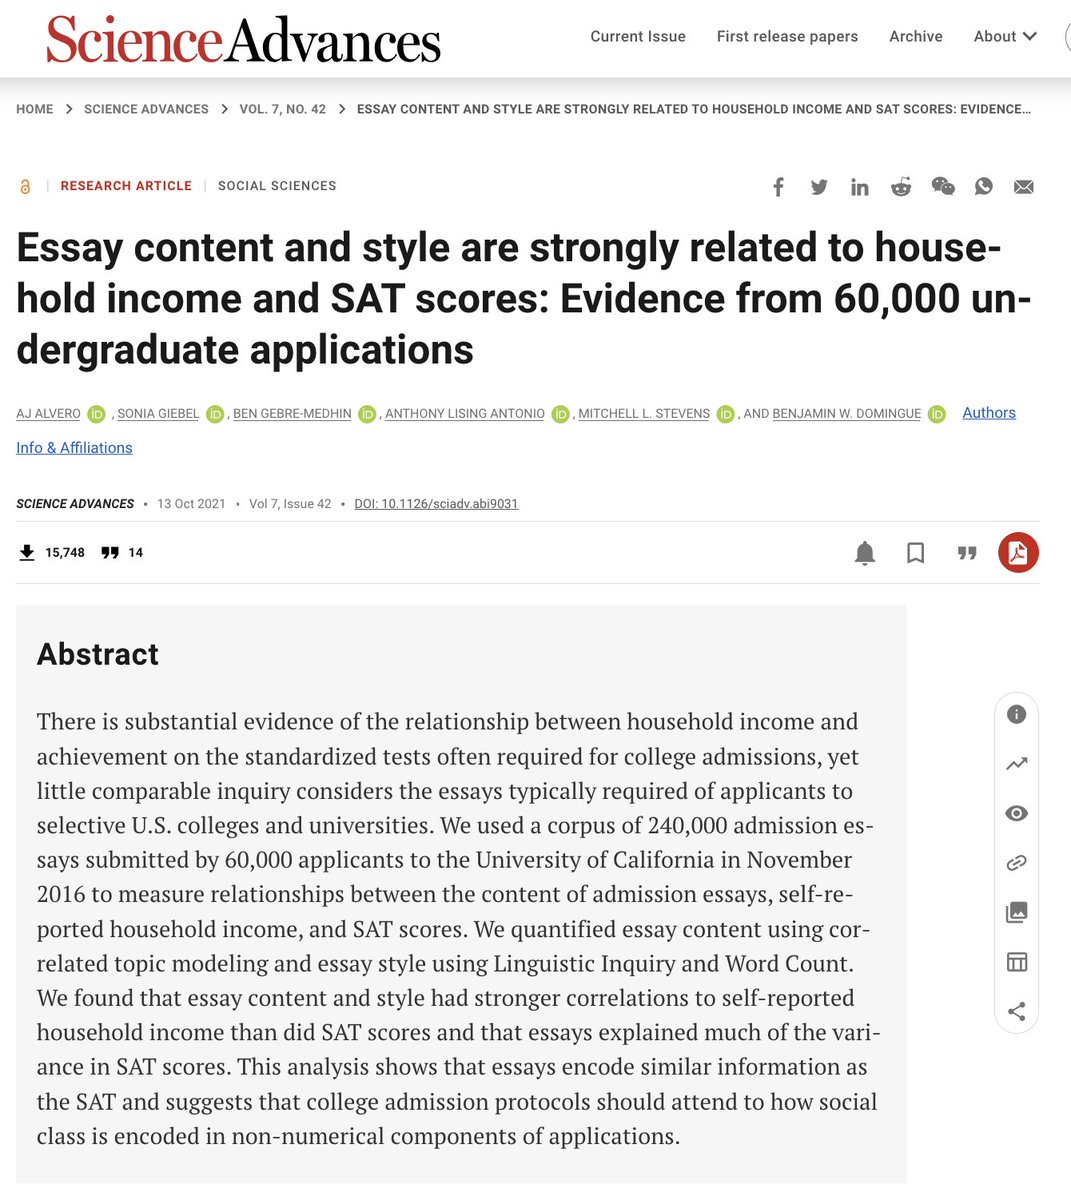 College admission essay content has a stronger correlation with household income (R2 = 16%) than SAT scores. This explains how removing standardized tests can increase inequality. Based on 240,000 admission essays to the University of California. science.org/doi/full/10.11…